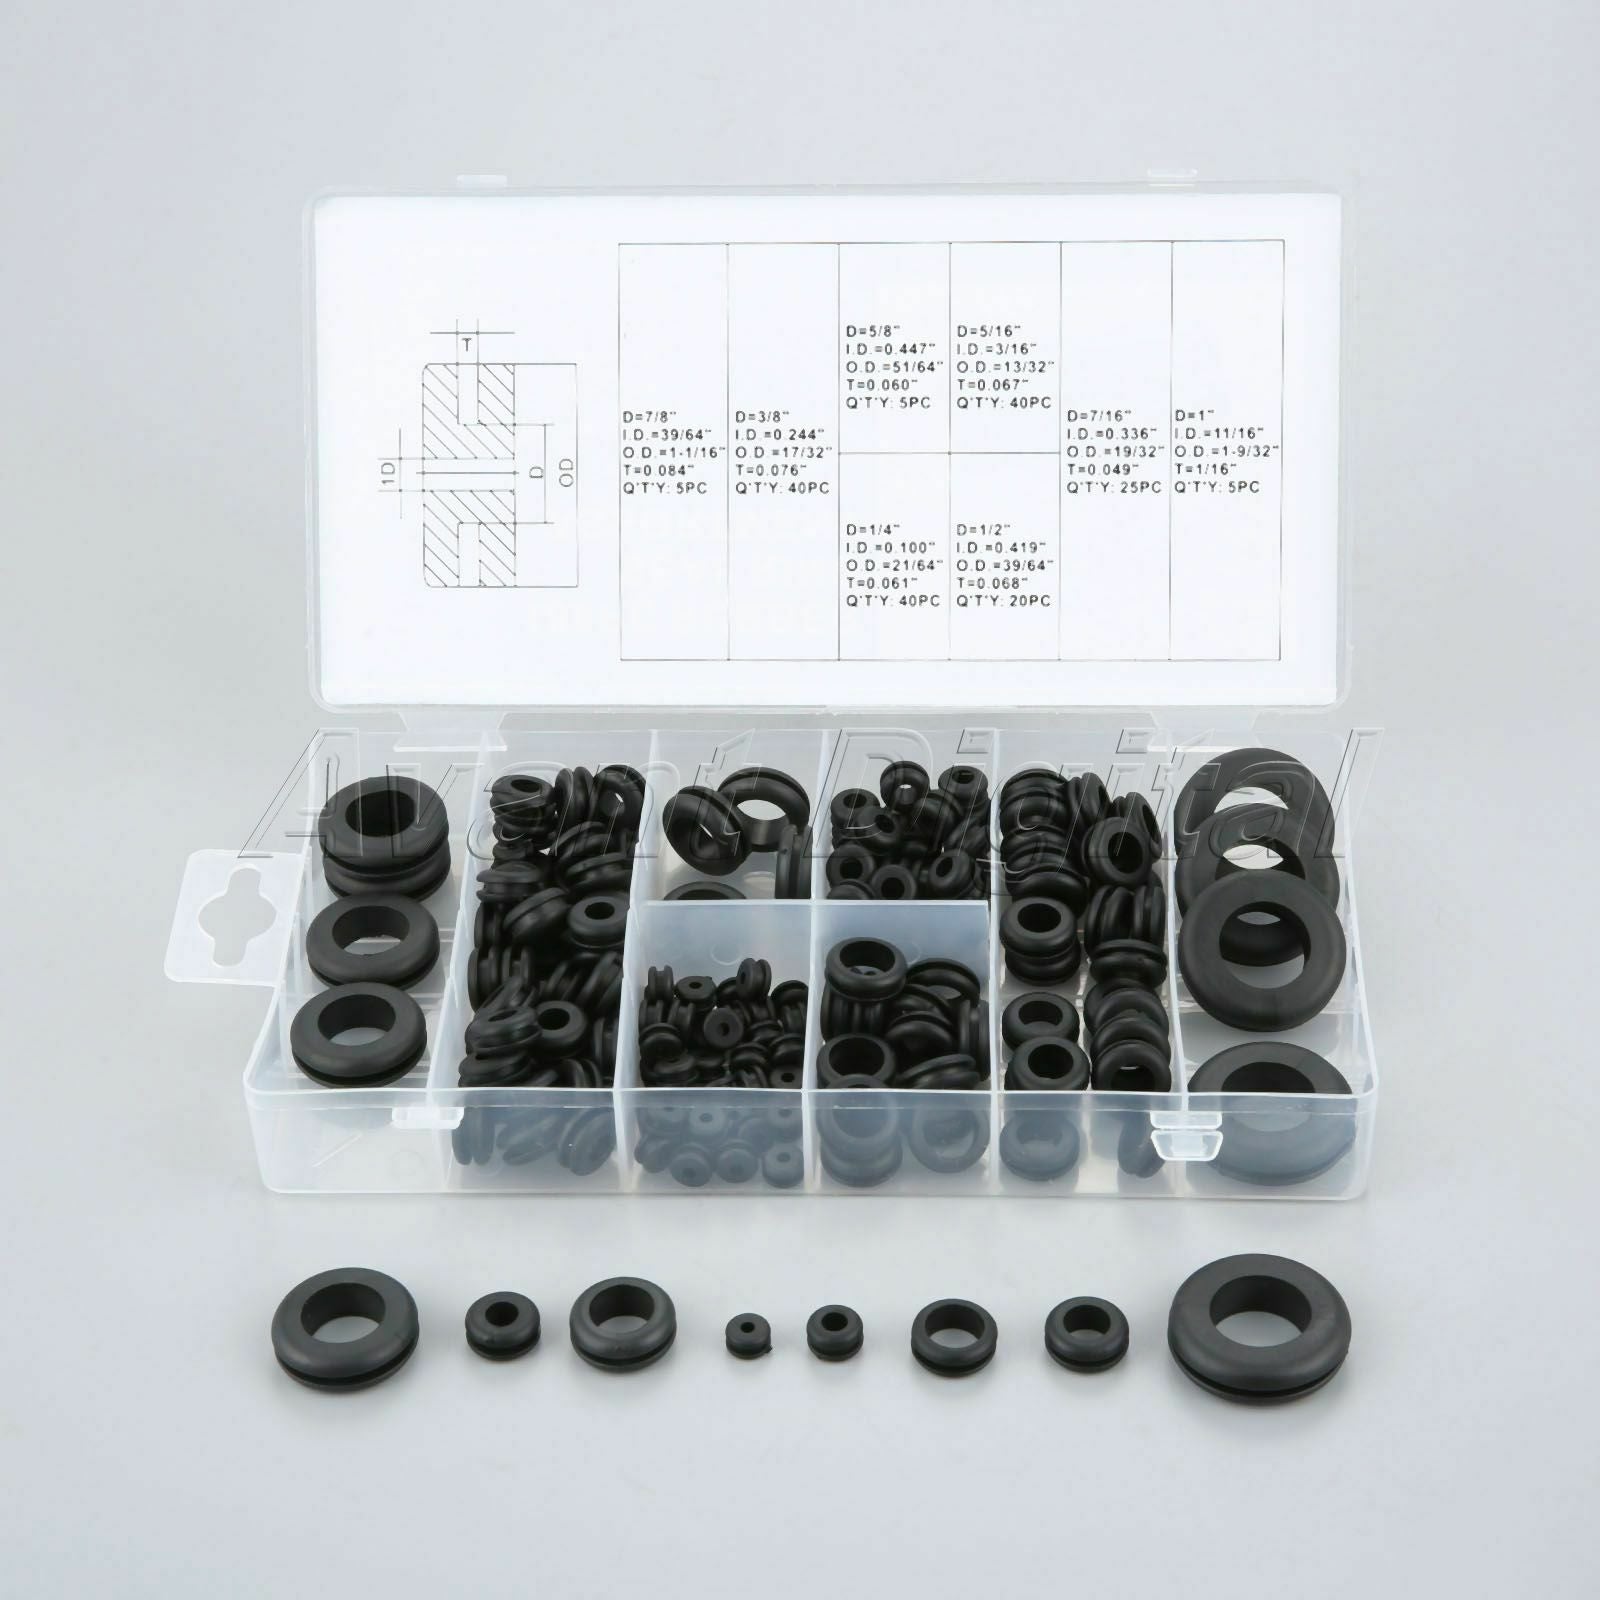 180pcs Rubber Grommet Assortment Ring Set Firewall Wiring Wire Cable Gasket Set